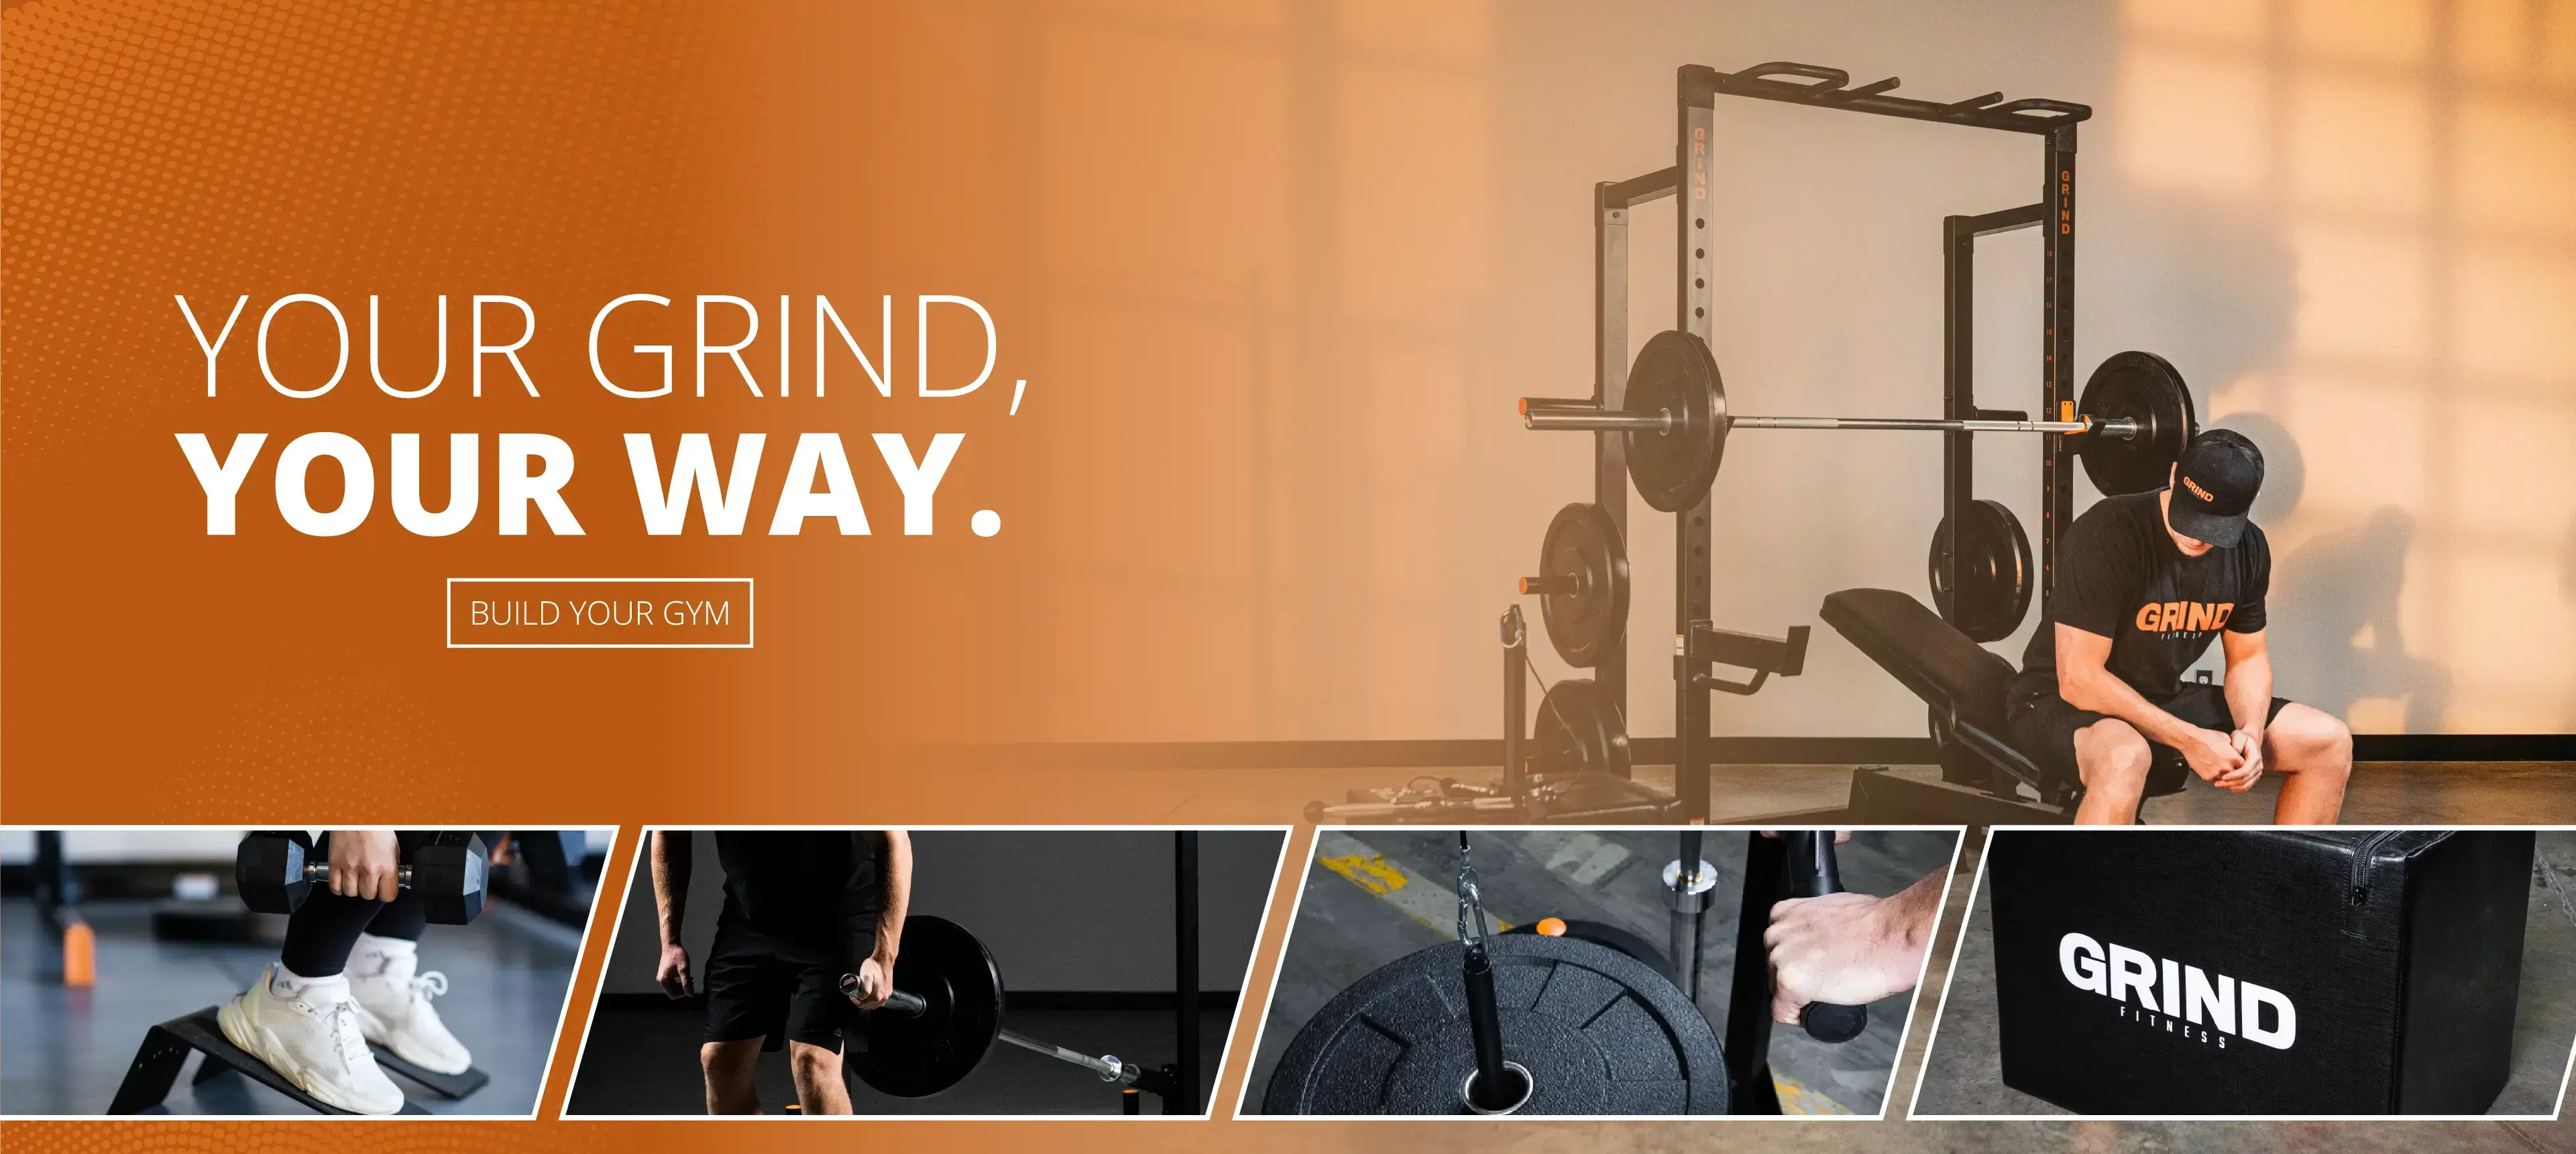 Your GRIND, Your Way. Click here to build your gym